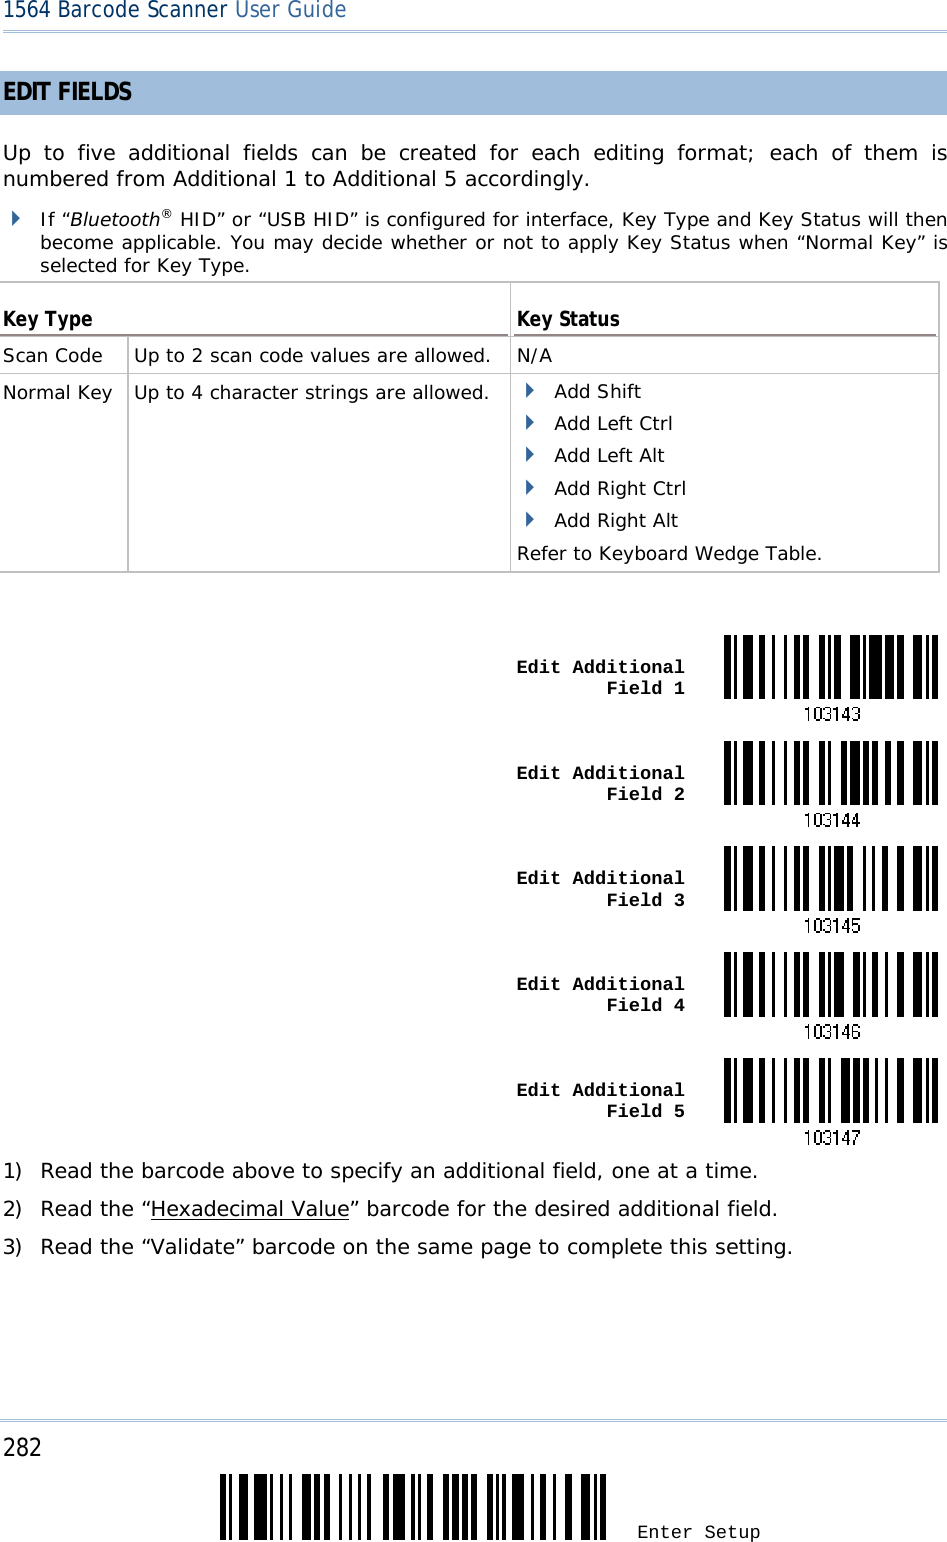 282 Enter Setup 1564 Barcode Scanner User Guide  EDIT FIELDS  Up to five additional fields can be created for each editing format; each of them is numbered from Additional 1 to Additional 5 accordingly.  If “Bluetooth® HID” or “USB HID” is configured for interface, Key Type and Key Status will then become applicable. You may decide whether or not to apply Key Status when “Normal Key” is selected for Key Type.  Key Type  Key Status Scan Code   Up to 2 scan code values are allowed. N/A Normal Key   Up to 4 character strings are allowed.   Add Shift  Add Left Ctrl  Add Left Alt  Add Right Ctrl  Add Right Alt Refer to Keyboard Wedge Table.   Edit Additional Field 1 Edit Additional Field 2 Edit Additional Field 3 Edit Additional Field 4 Edit Additional Field 51) Read the barcode above to specify an additional field, one at a time. 2) Read the “Hexadecimal Value” barcode for the desired additional field. 3) Read the “Validate” barcode on the same page to complete this setting.  